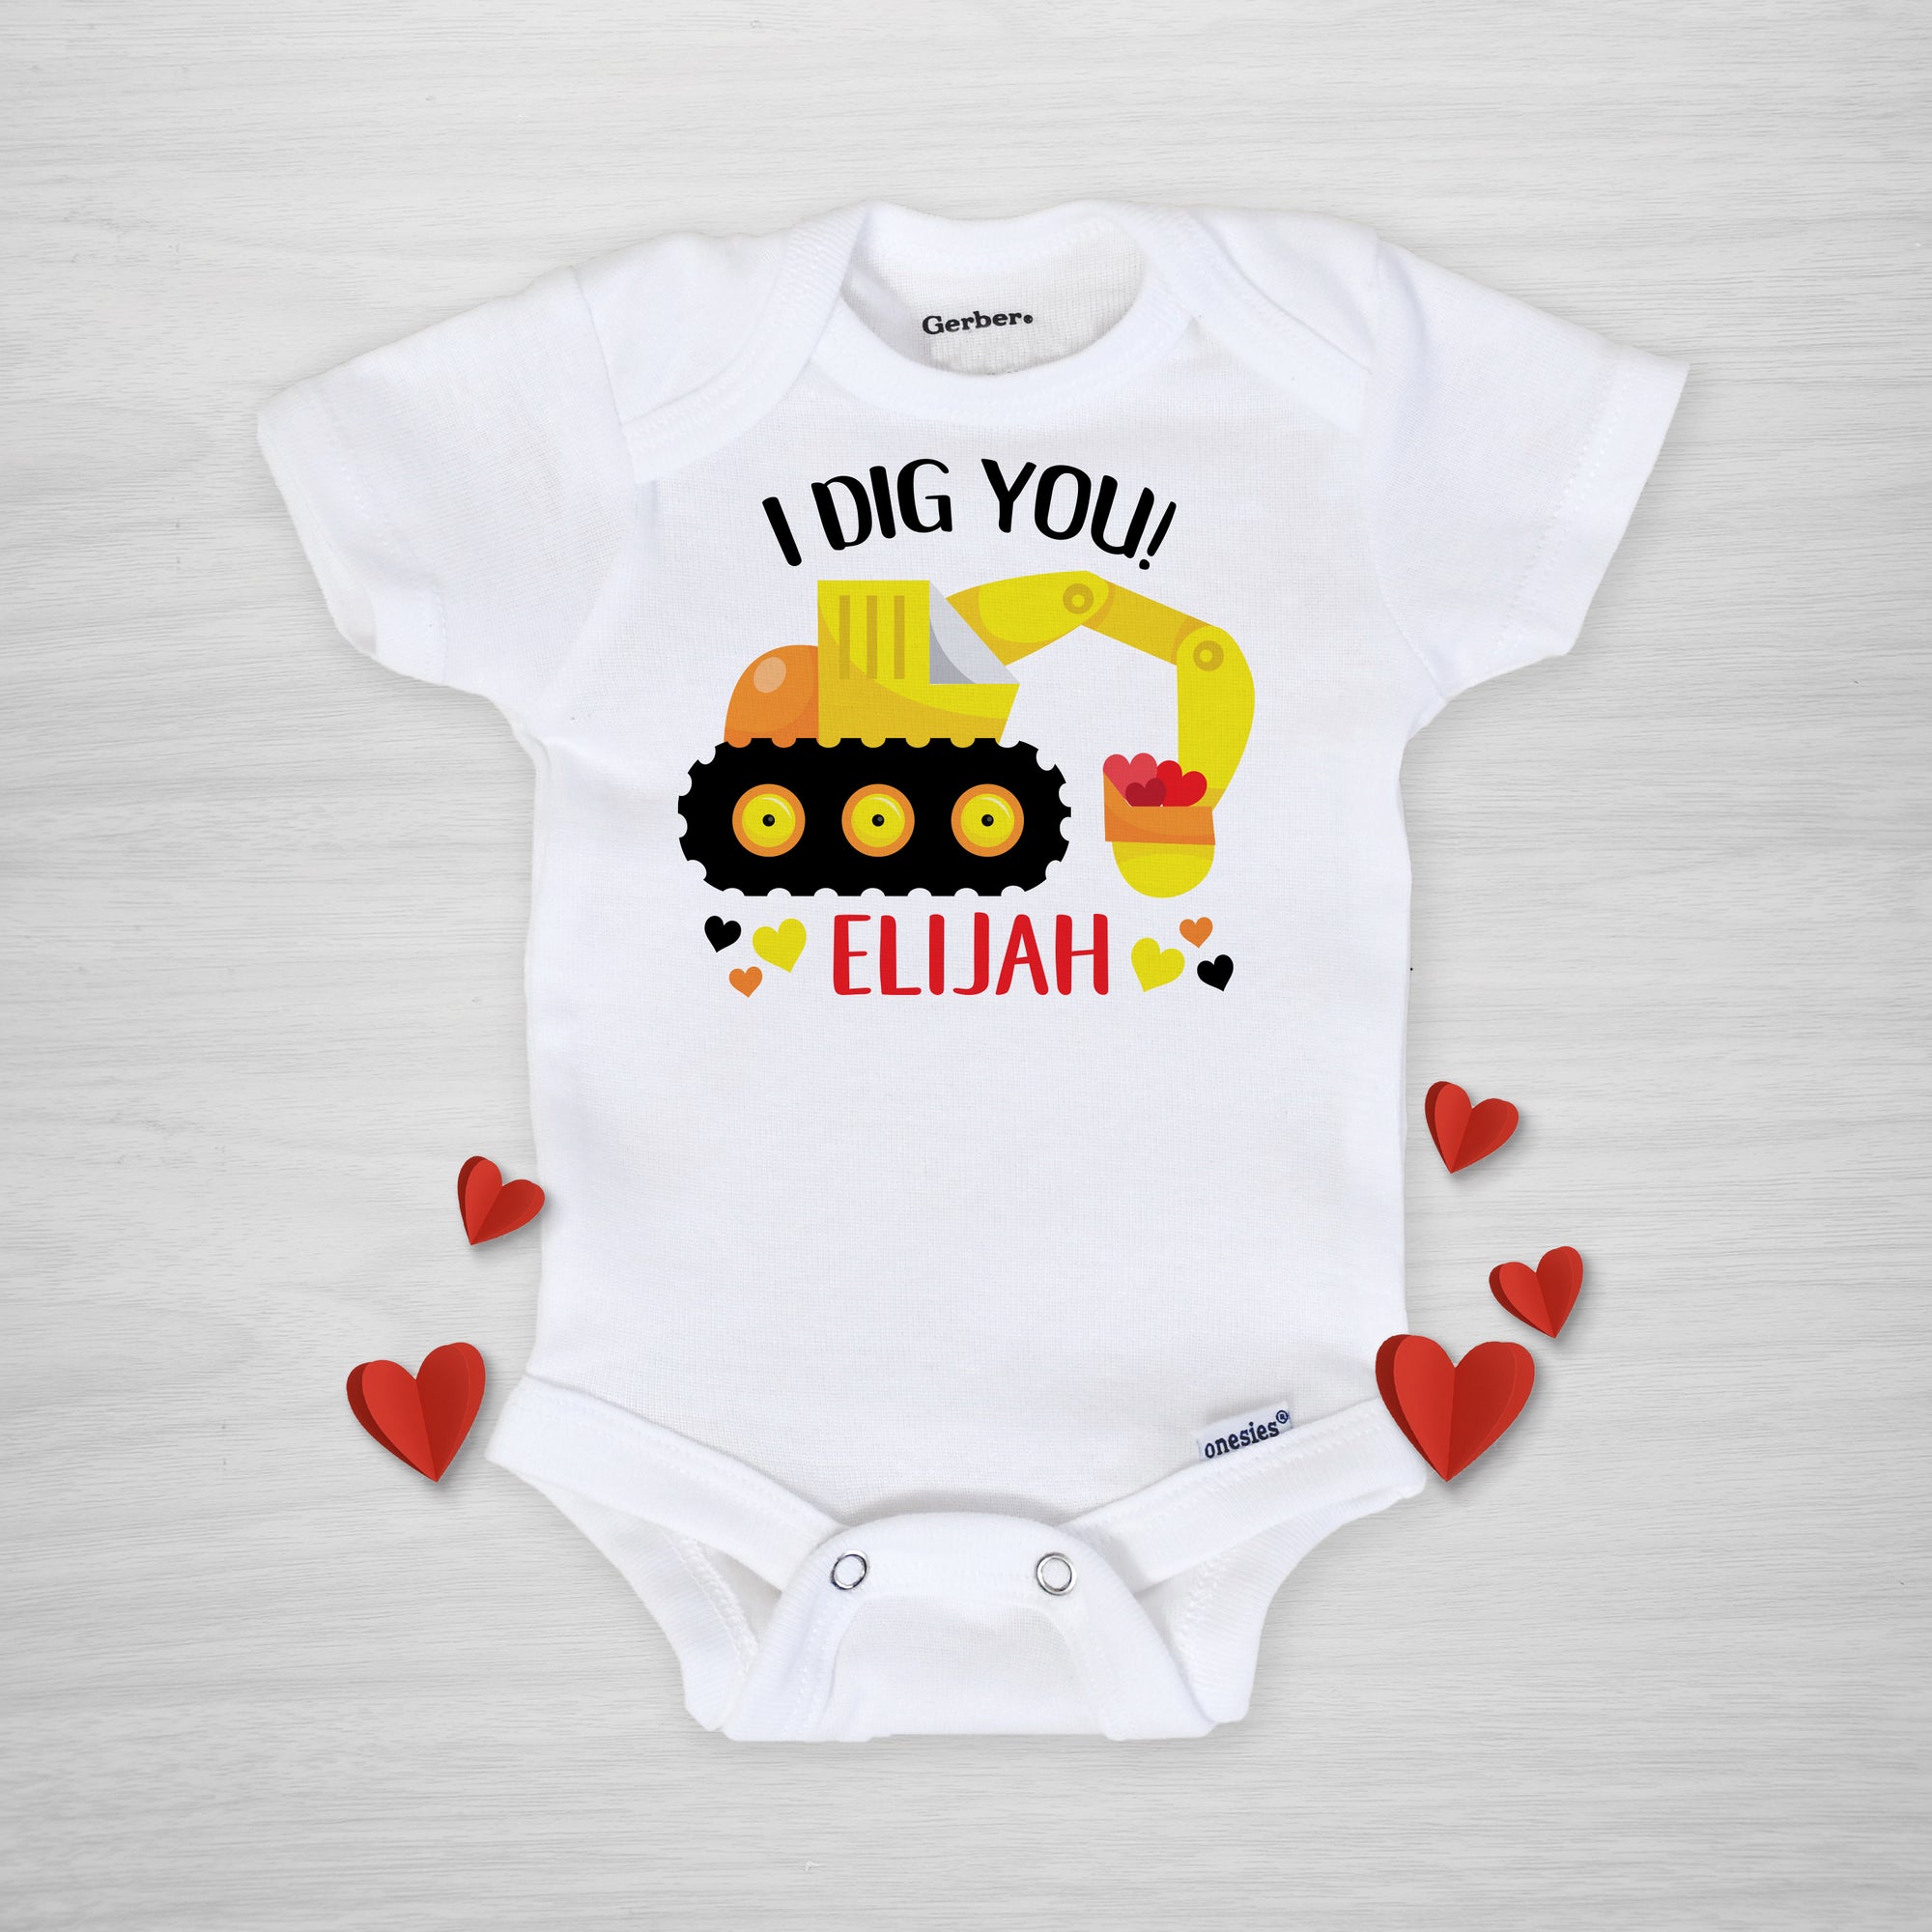 Valentine's Day Personalized Gerber Onesie, backhoe excavator "I dig you" personalized, short sleeve